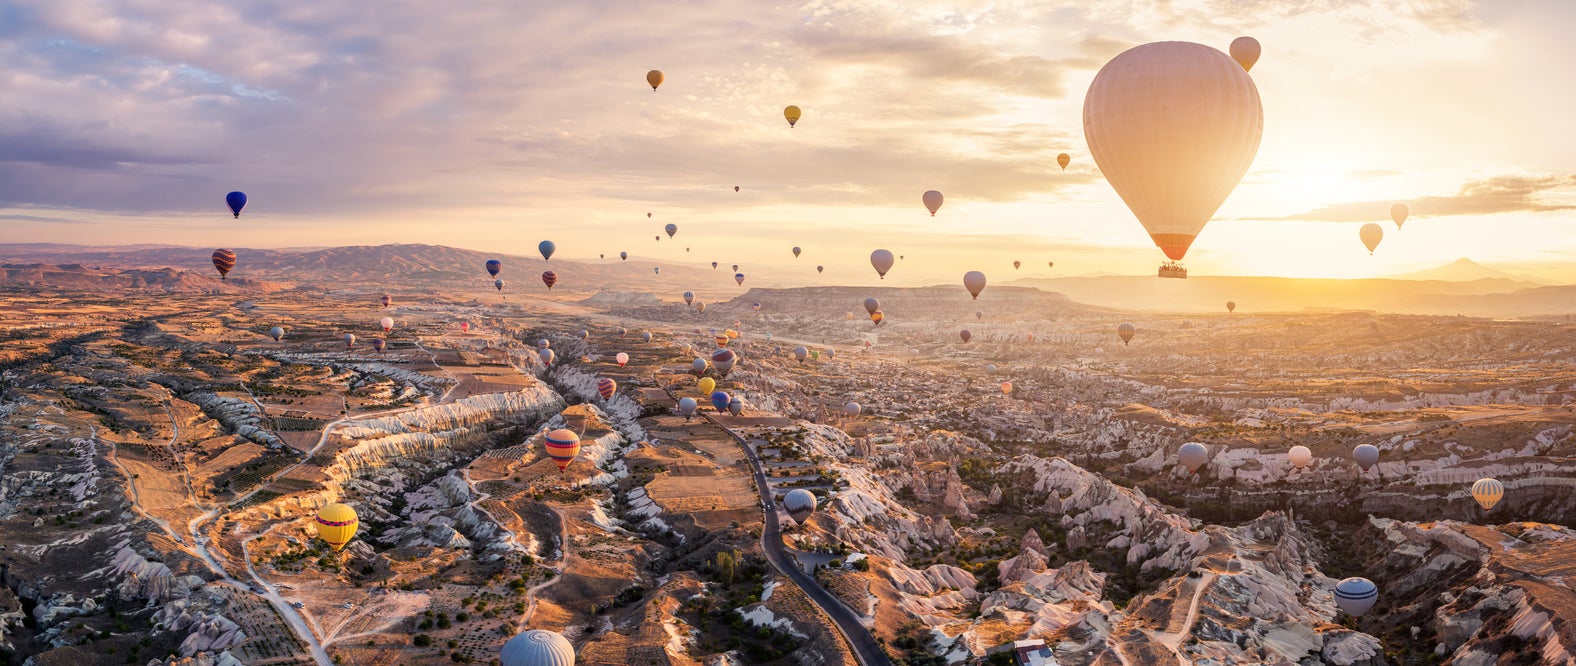 Hot air balloon rides are a popular way to get great views of the region